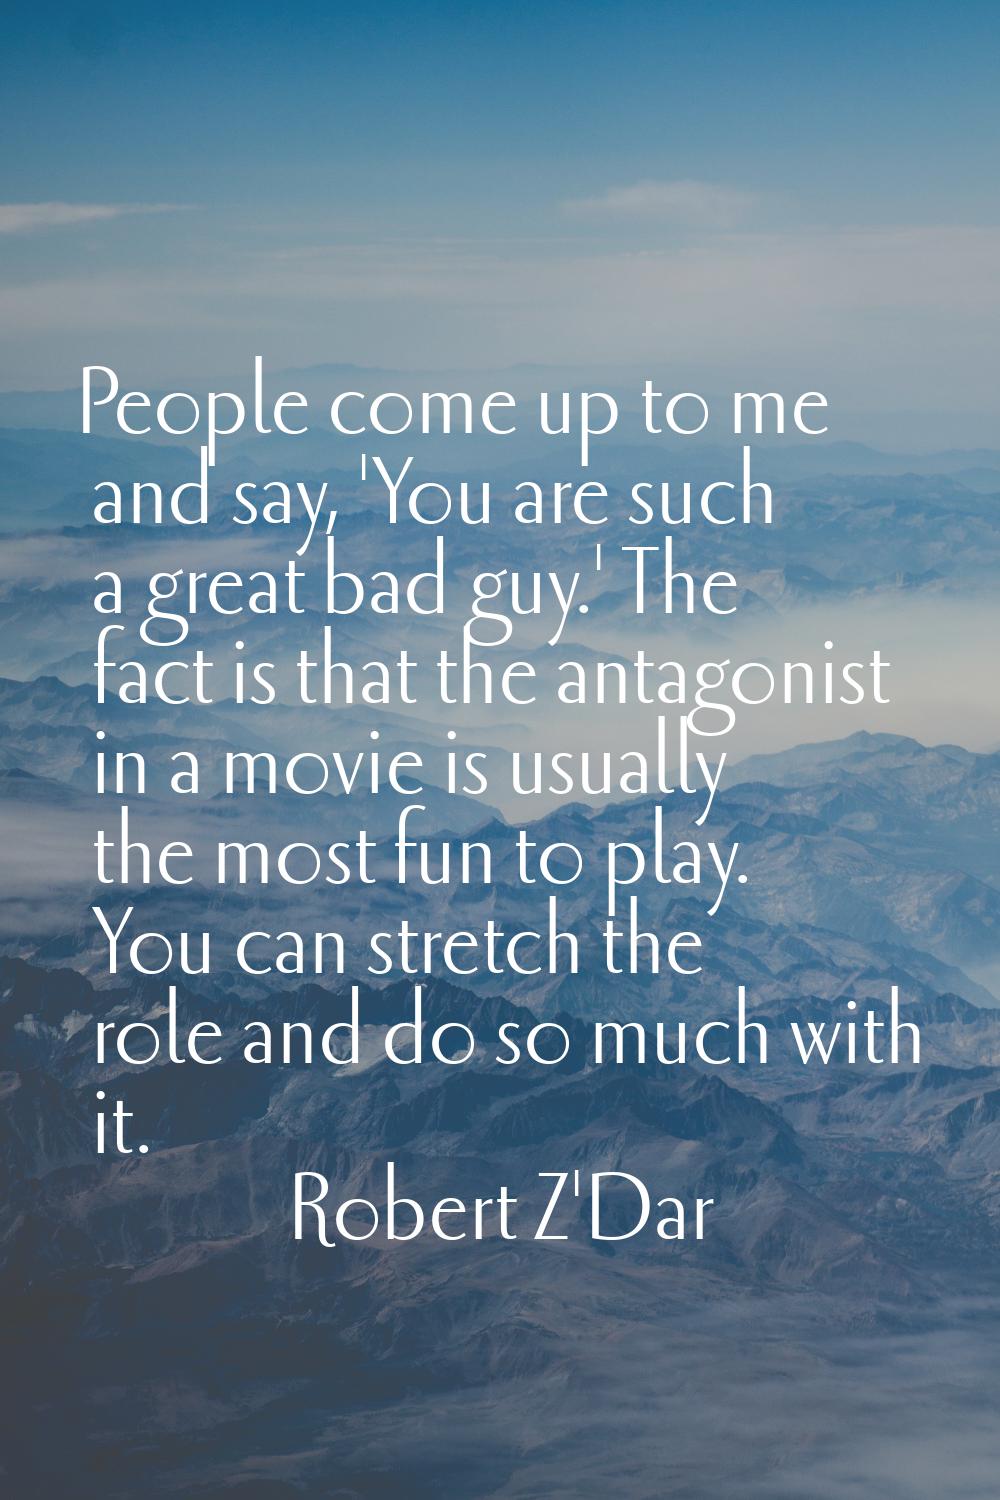 People come up to me and say, 'You are such a great bad guy.' The fact is that the antagonist in a 